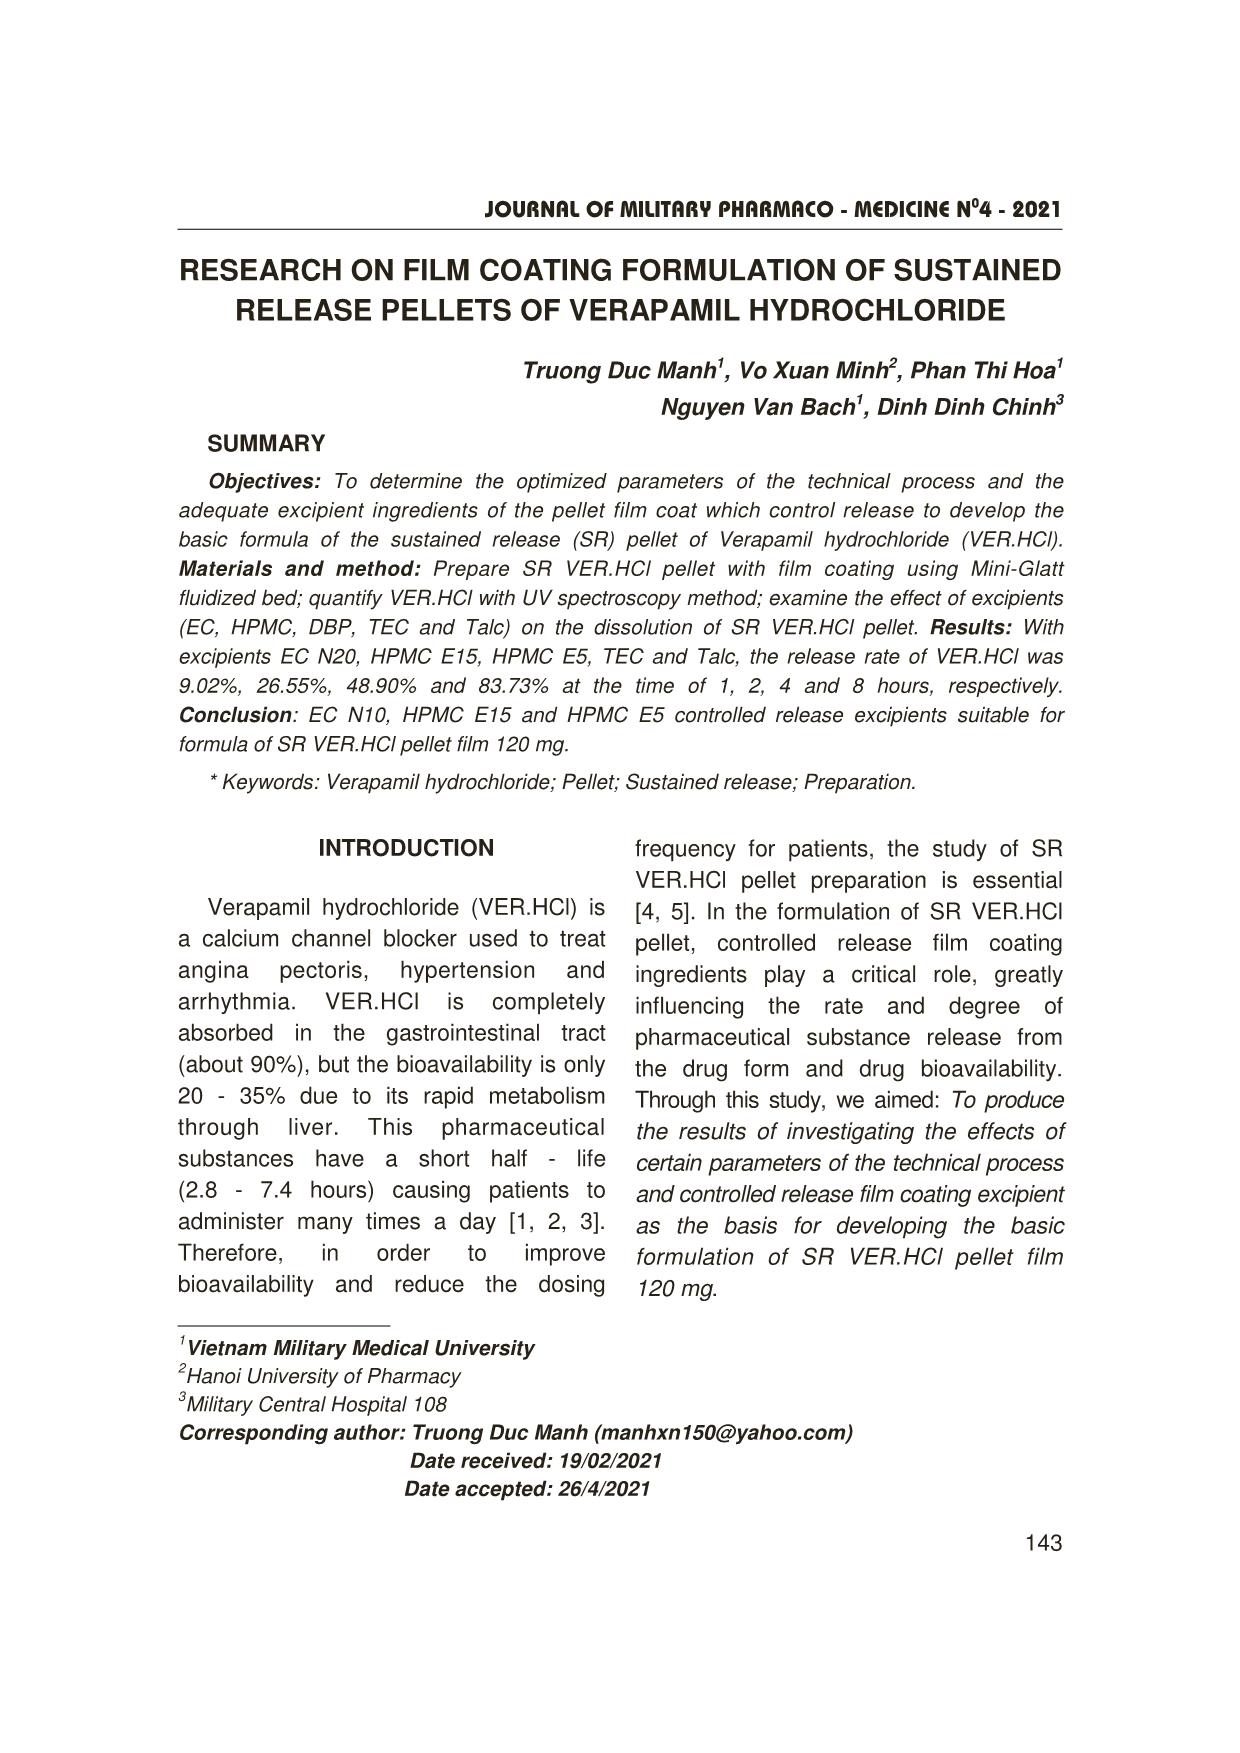 Research on film coating formulation of sustained release pellets of verapamil hydrochloride trang 1